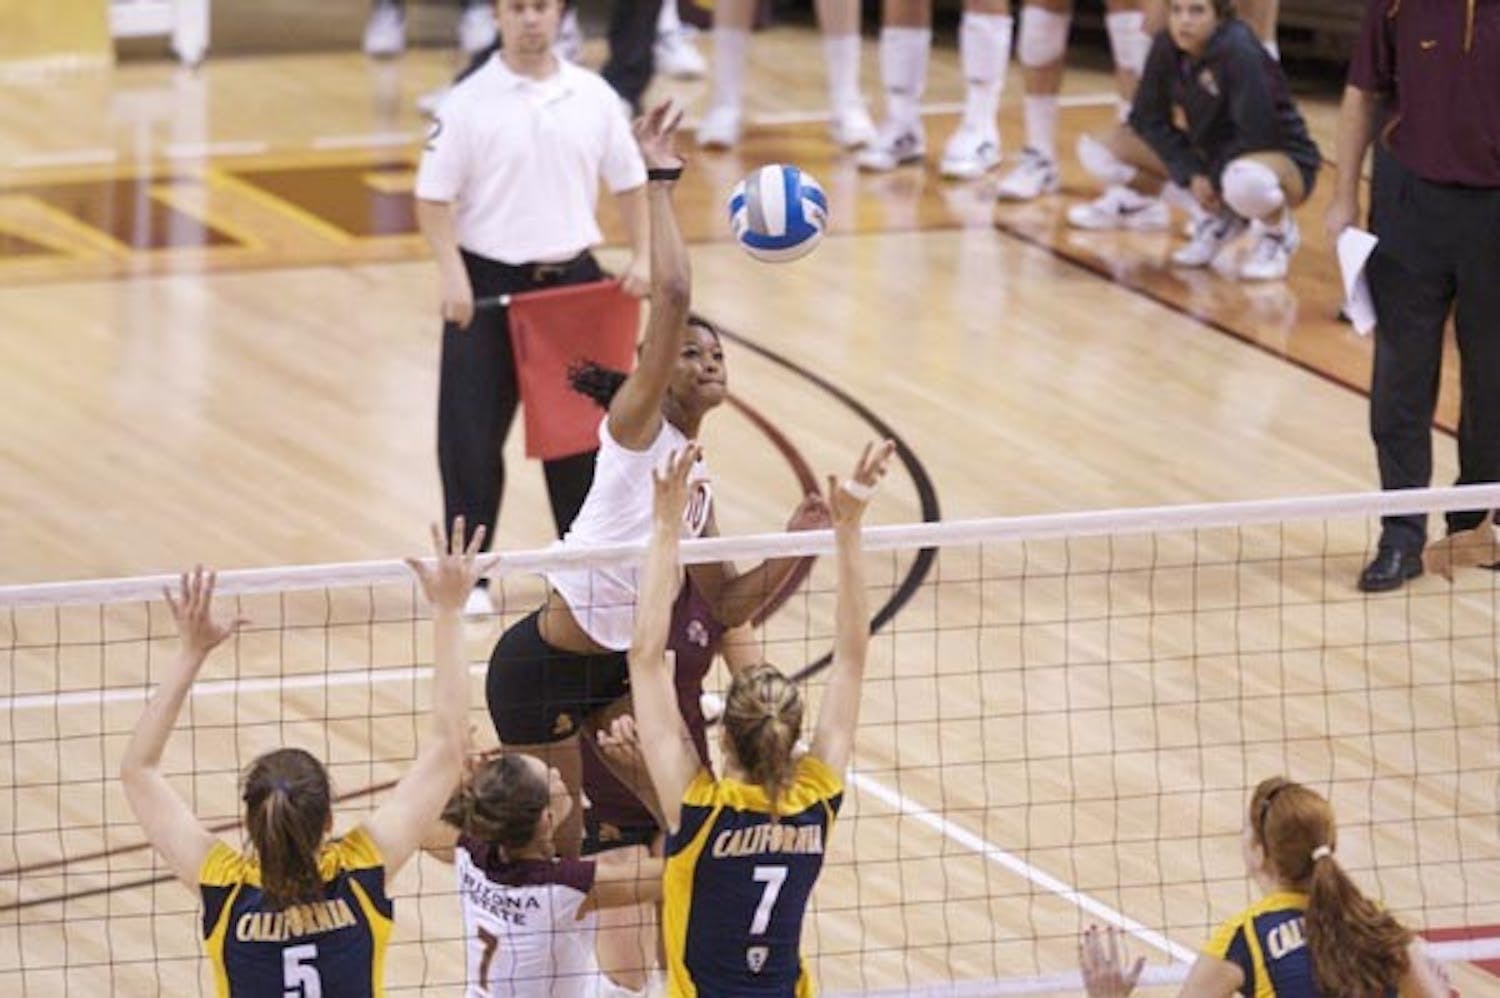 HARD HITTER: Sophomore middle blocker Erica Wilson jumps to spike a ball against California last weekend. After losing two games to start Pac-10 play last weekend, ASU travels to Tucson to take on UA. (Photo by Scott Stuk)